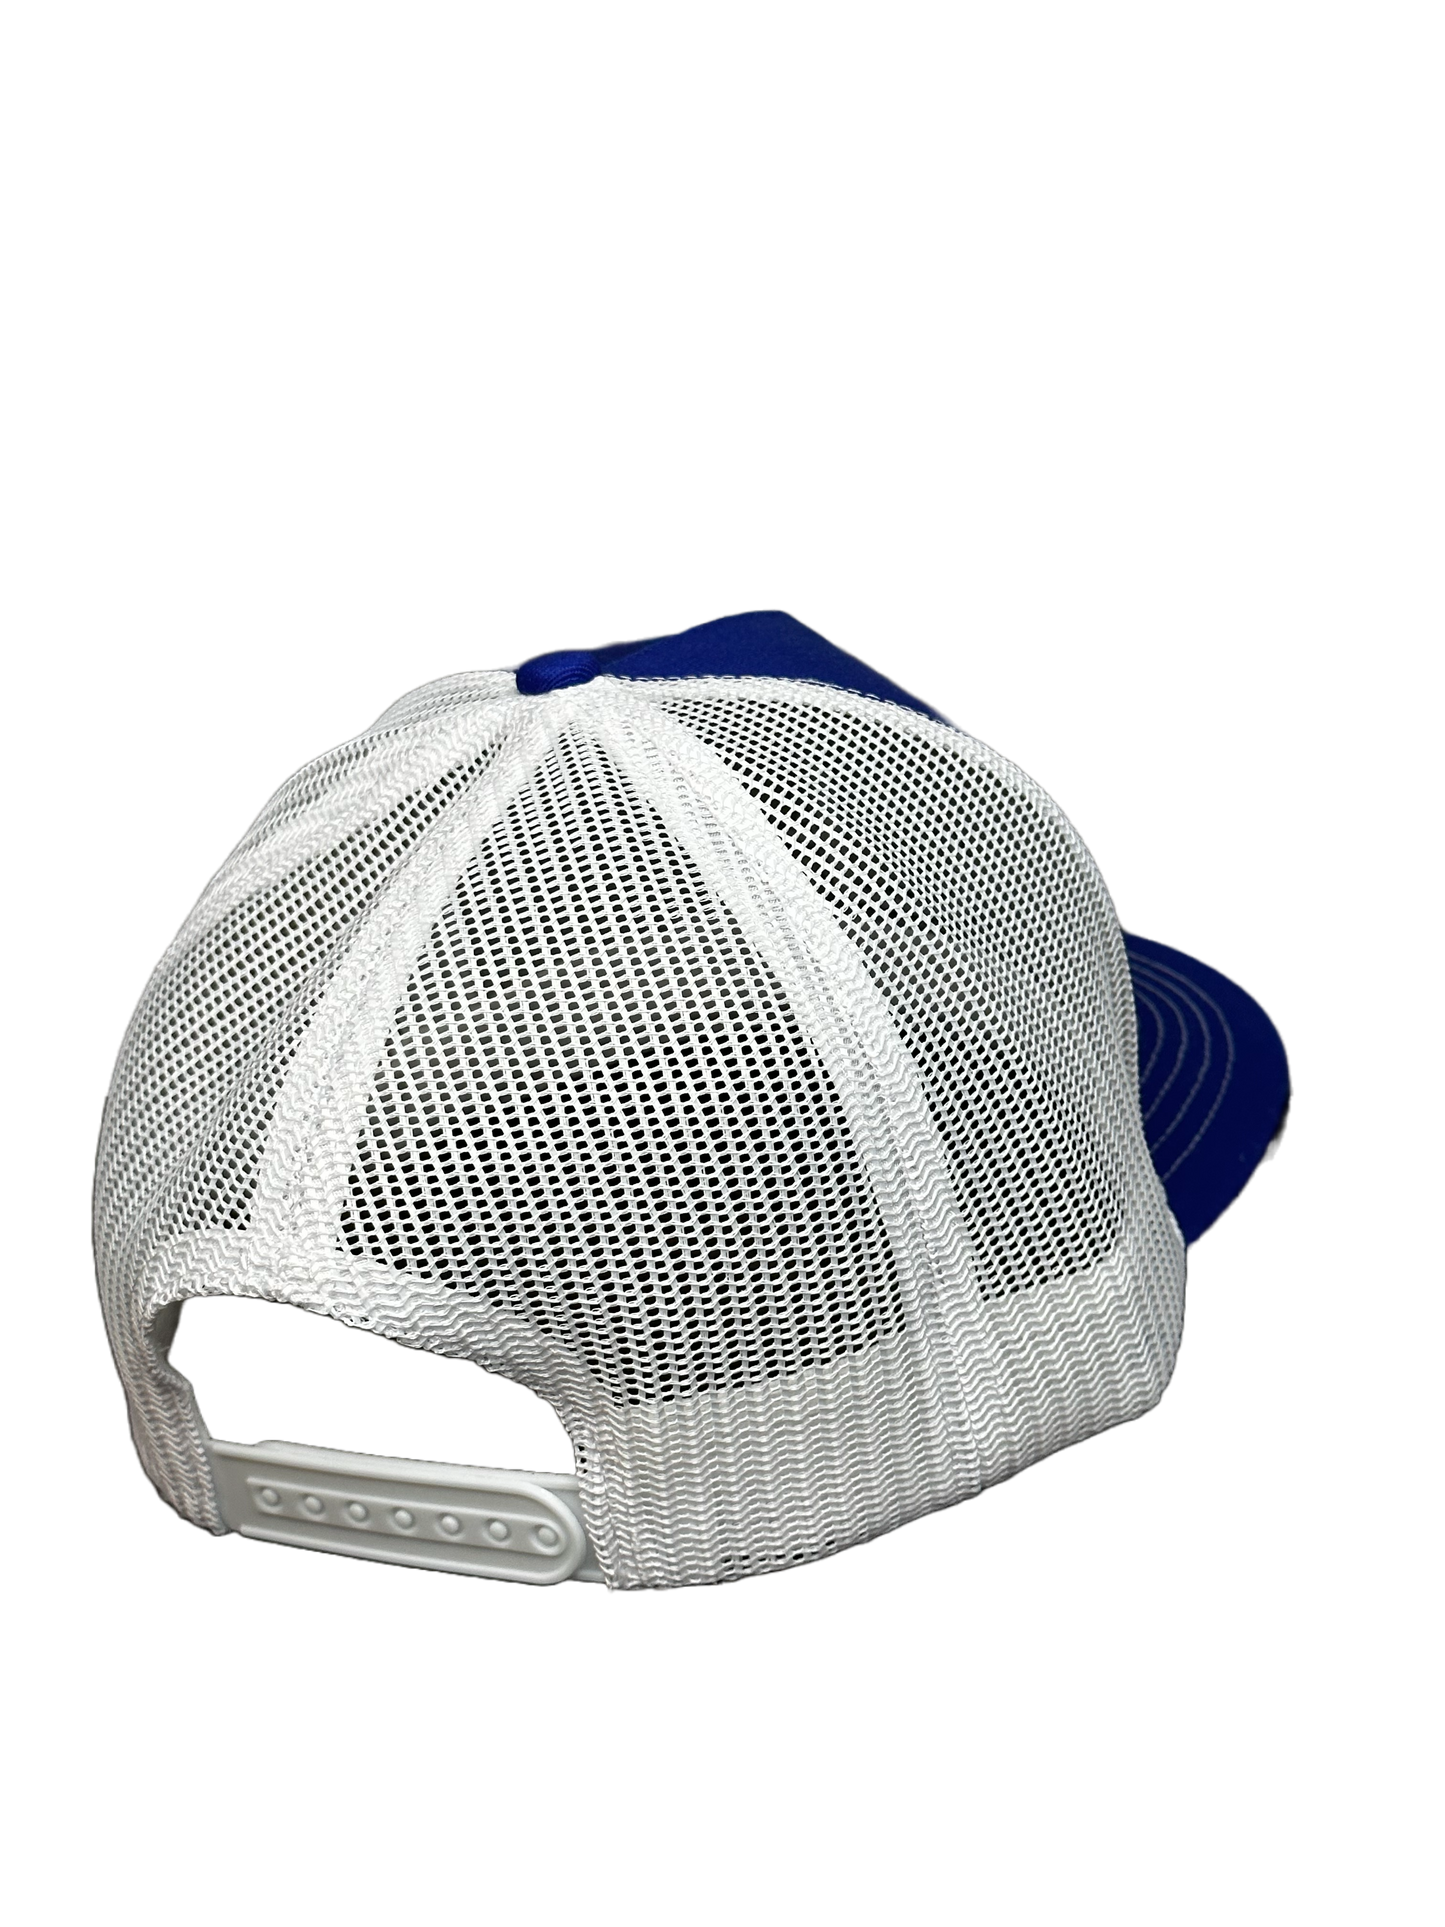 Trucker Royal Blue and White Cap